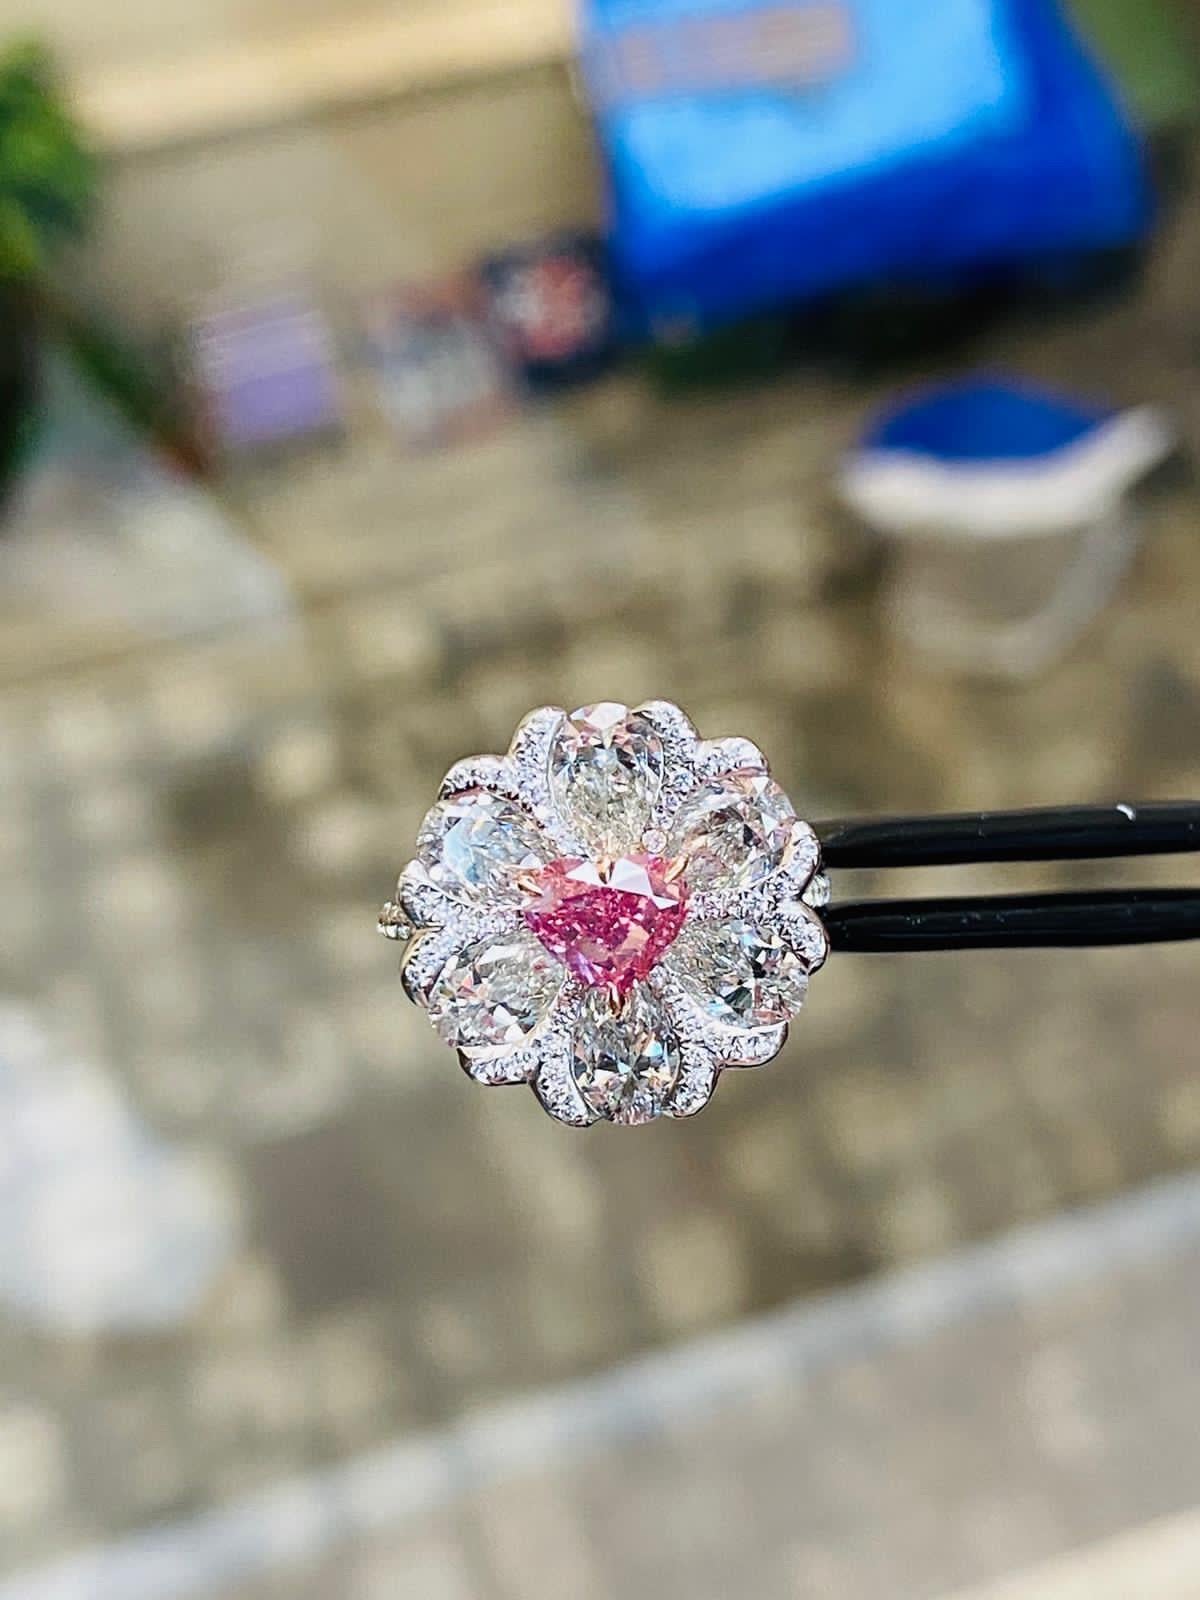 From the Emilio Jewelry Museum Vault, Showcasing a stunning Gia certified 1.00  Natural Fancy vivid  purplish pink heart shape diamond in the center. This is an extremely rare pink diamond, as the color saturation is Vivid, which is the best grading